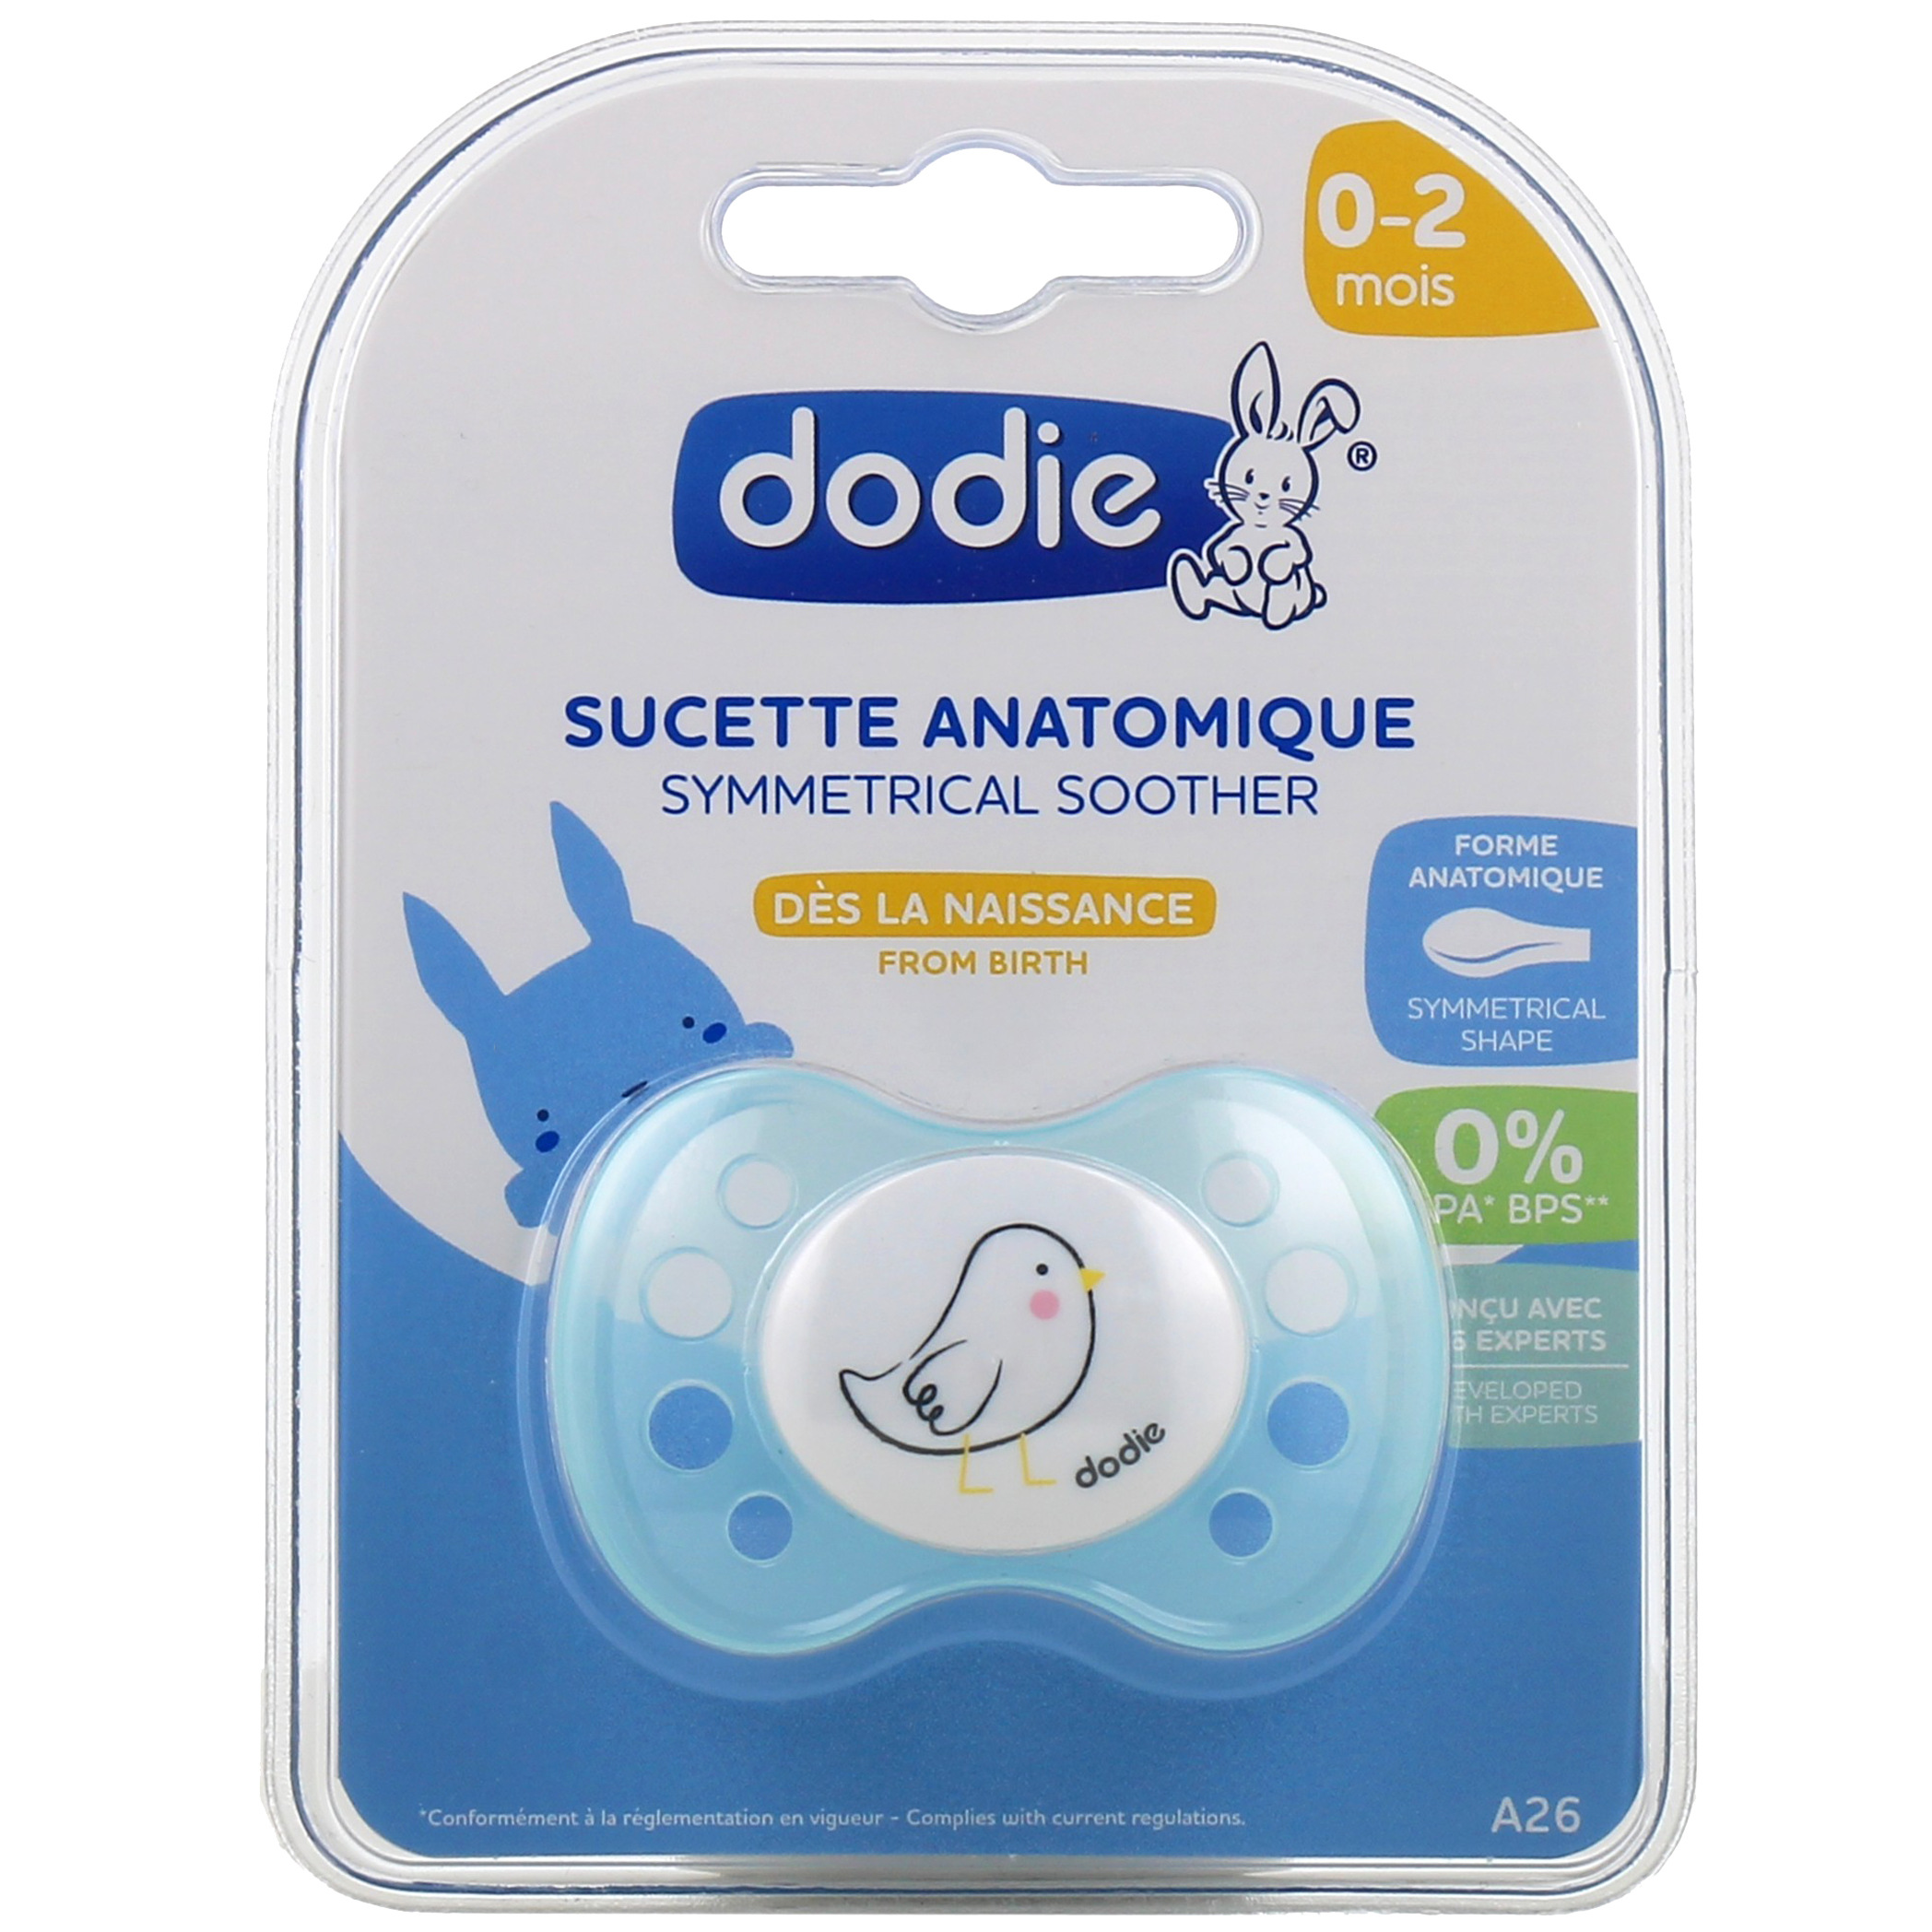 https://cdn.pharmaciedesdrakkars.com/media/images/products/dodie-sucette-anatomique-0-2-mois-dodie3-1700142498.jpg